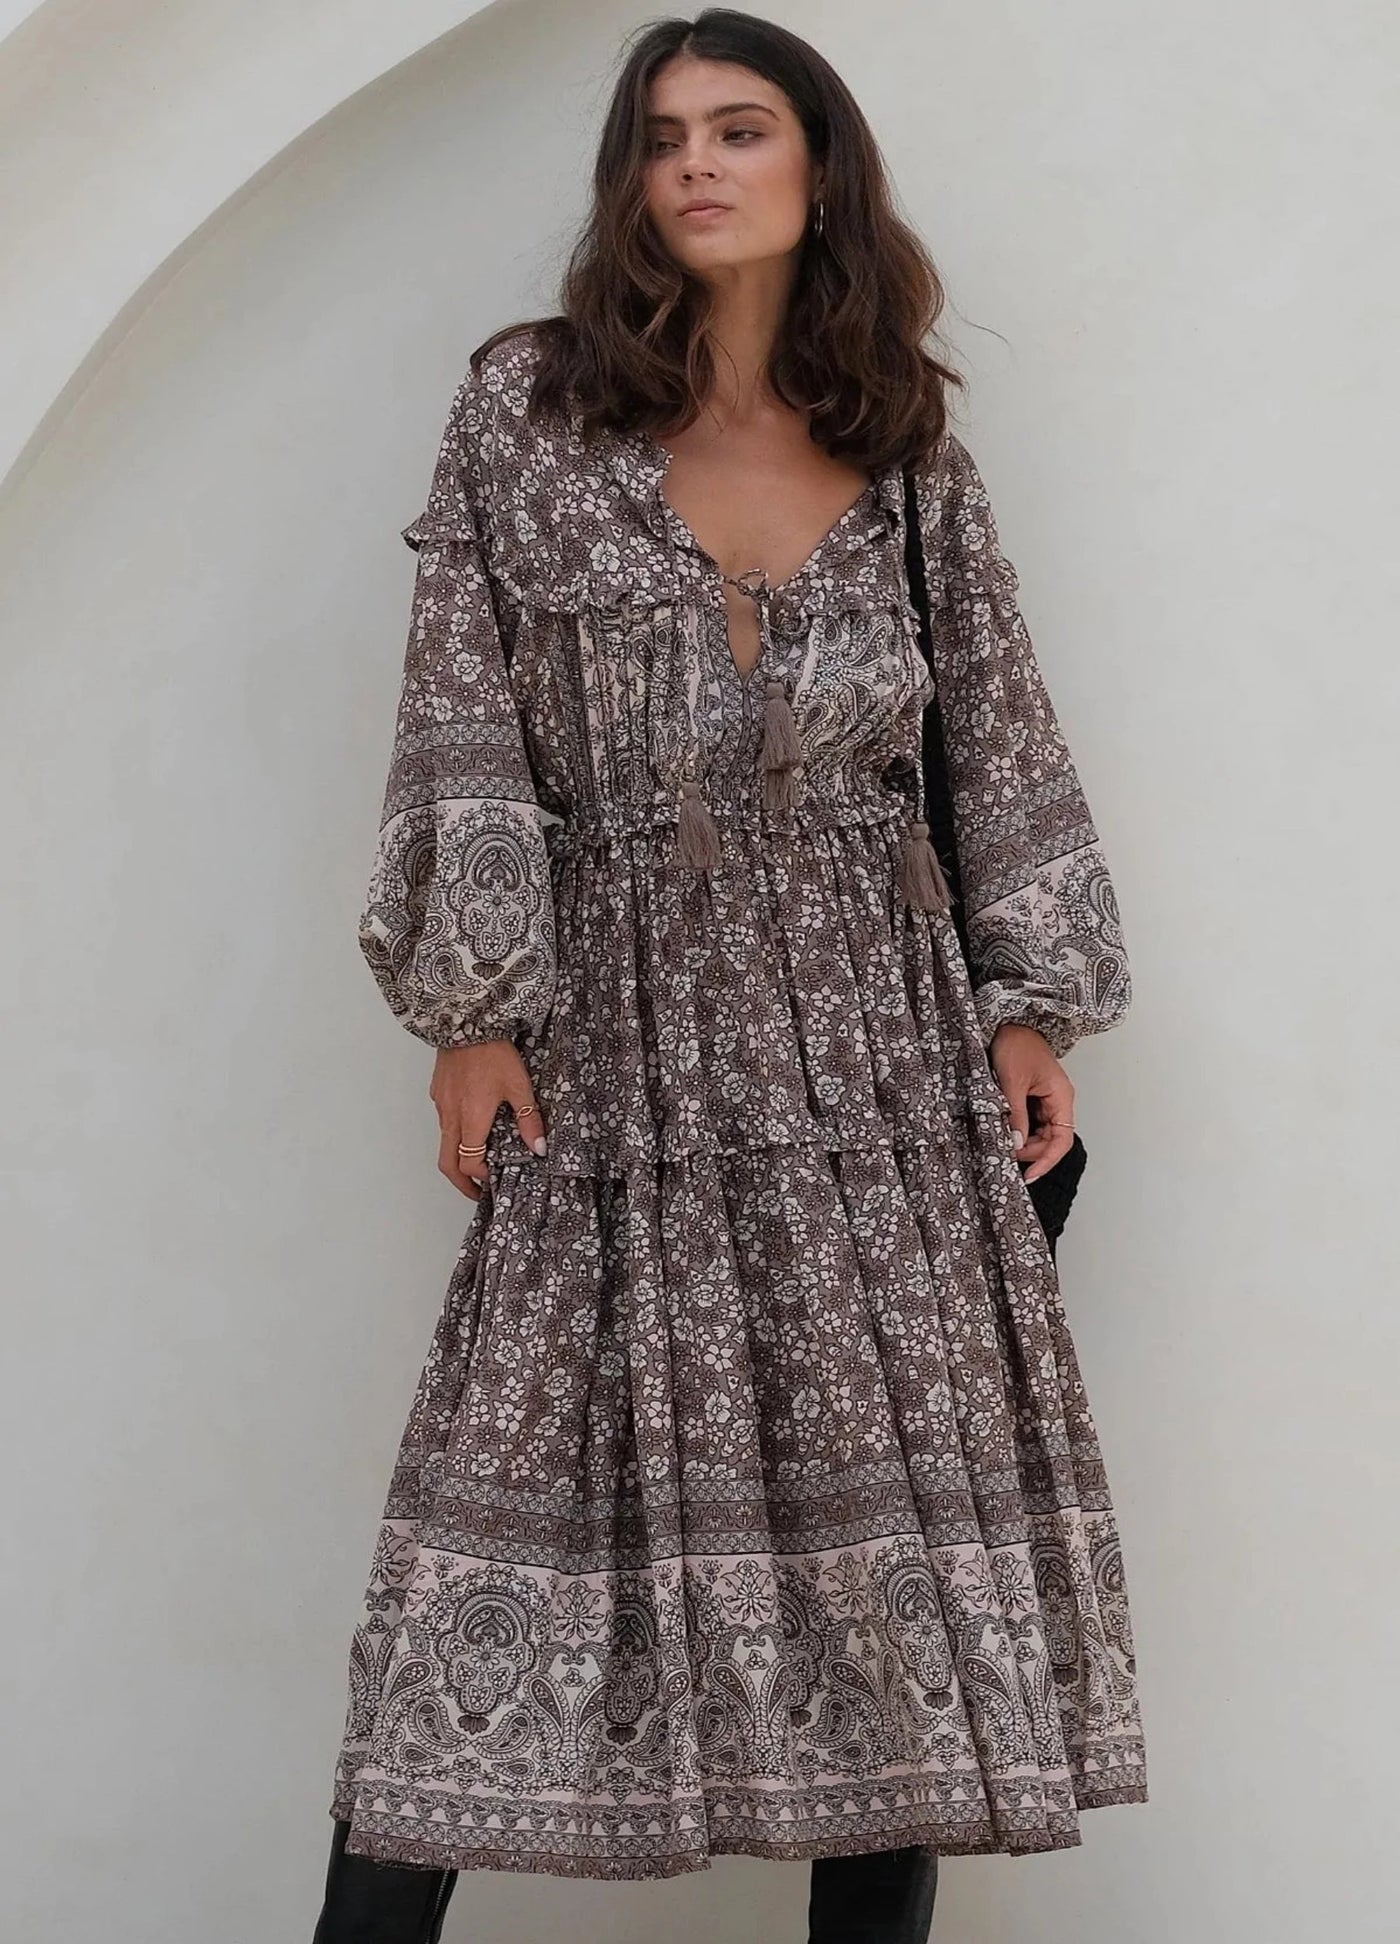 Model wearing celestial brown floral boho dress from Mahli the label